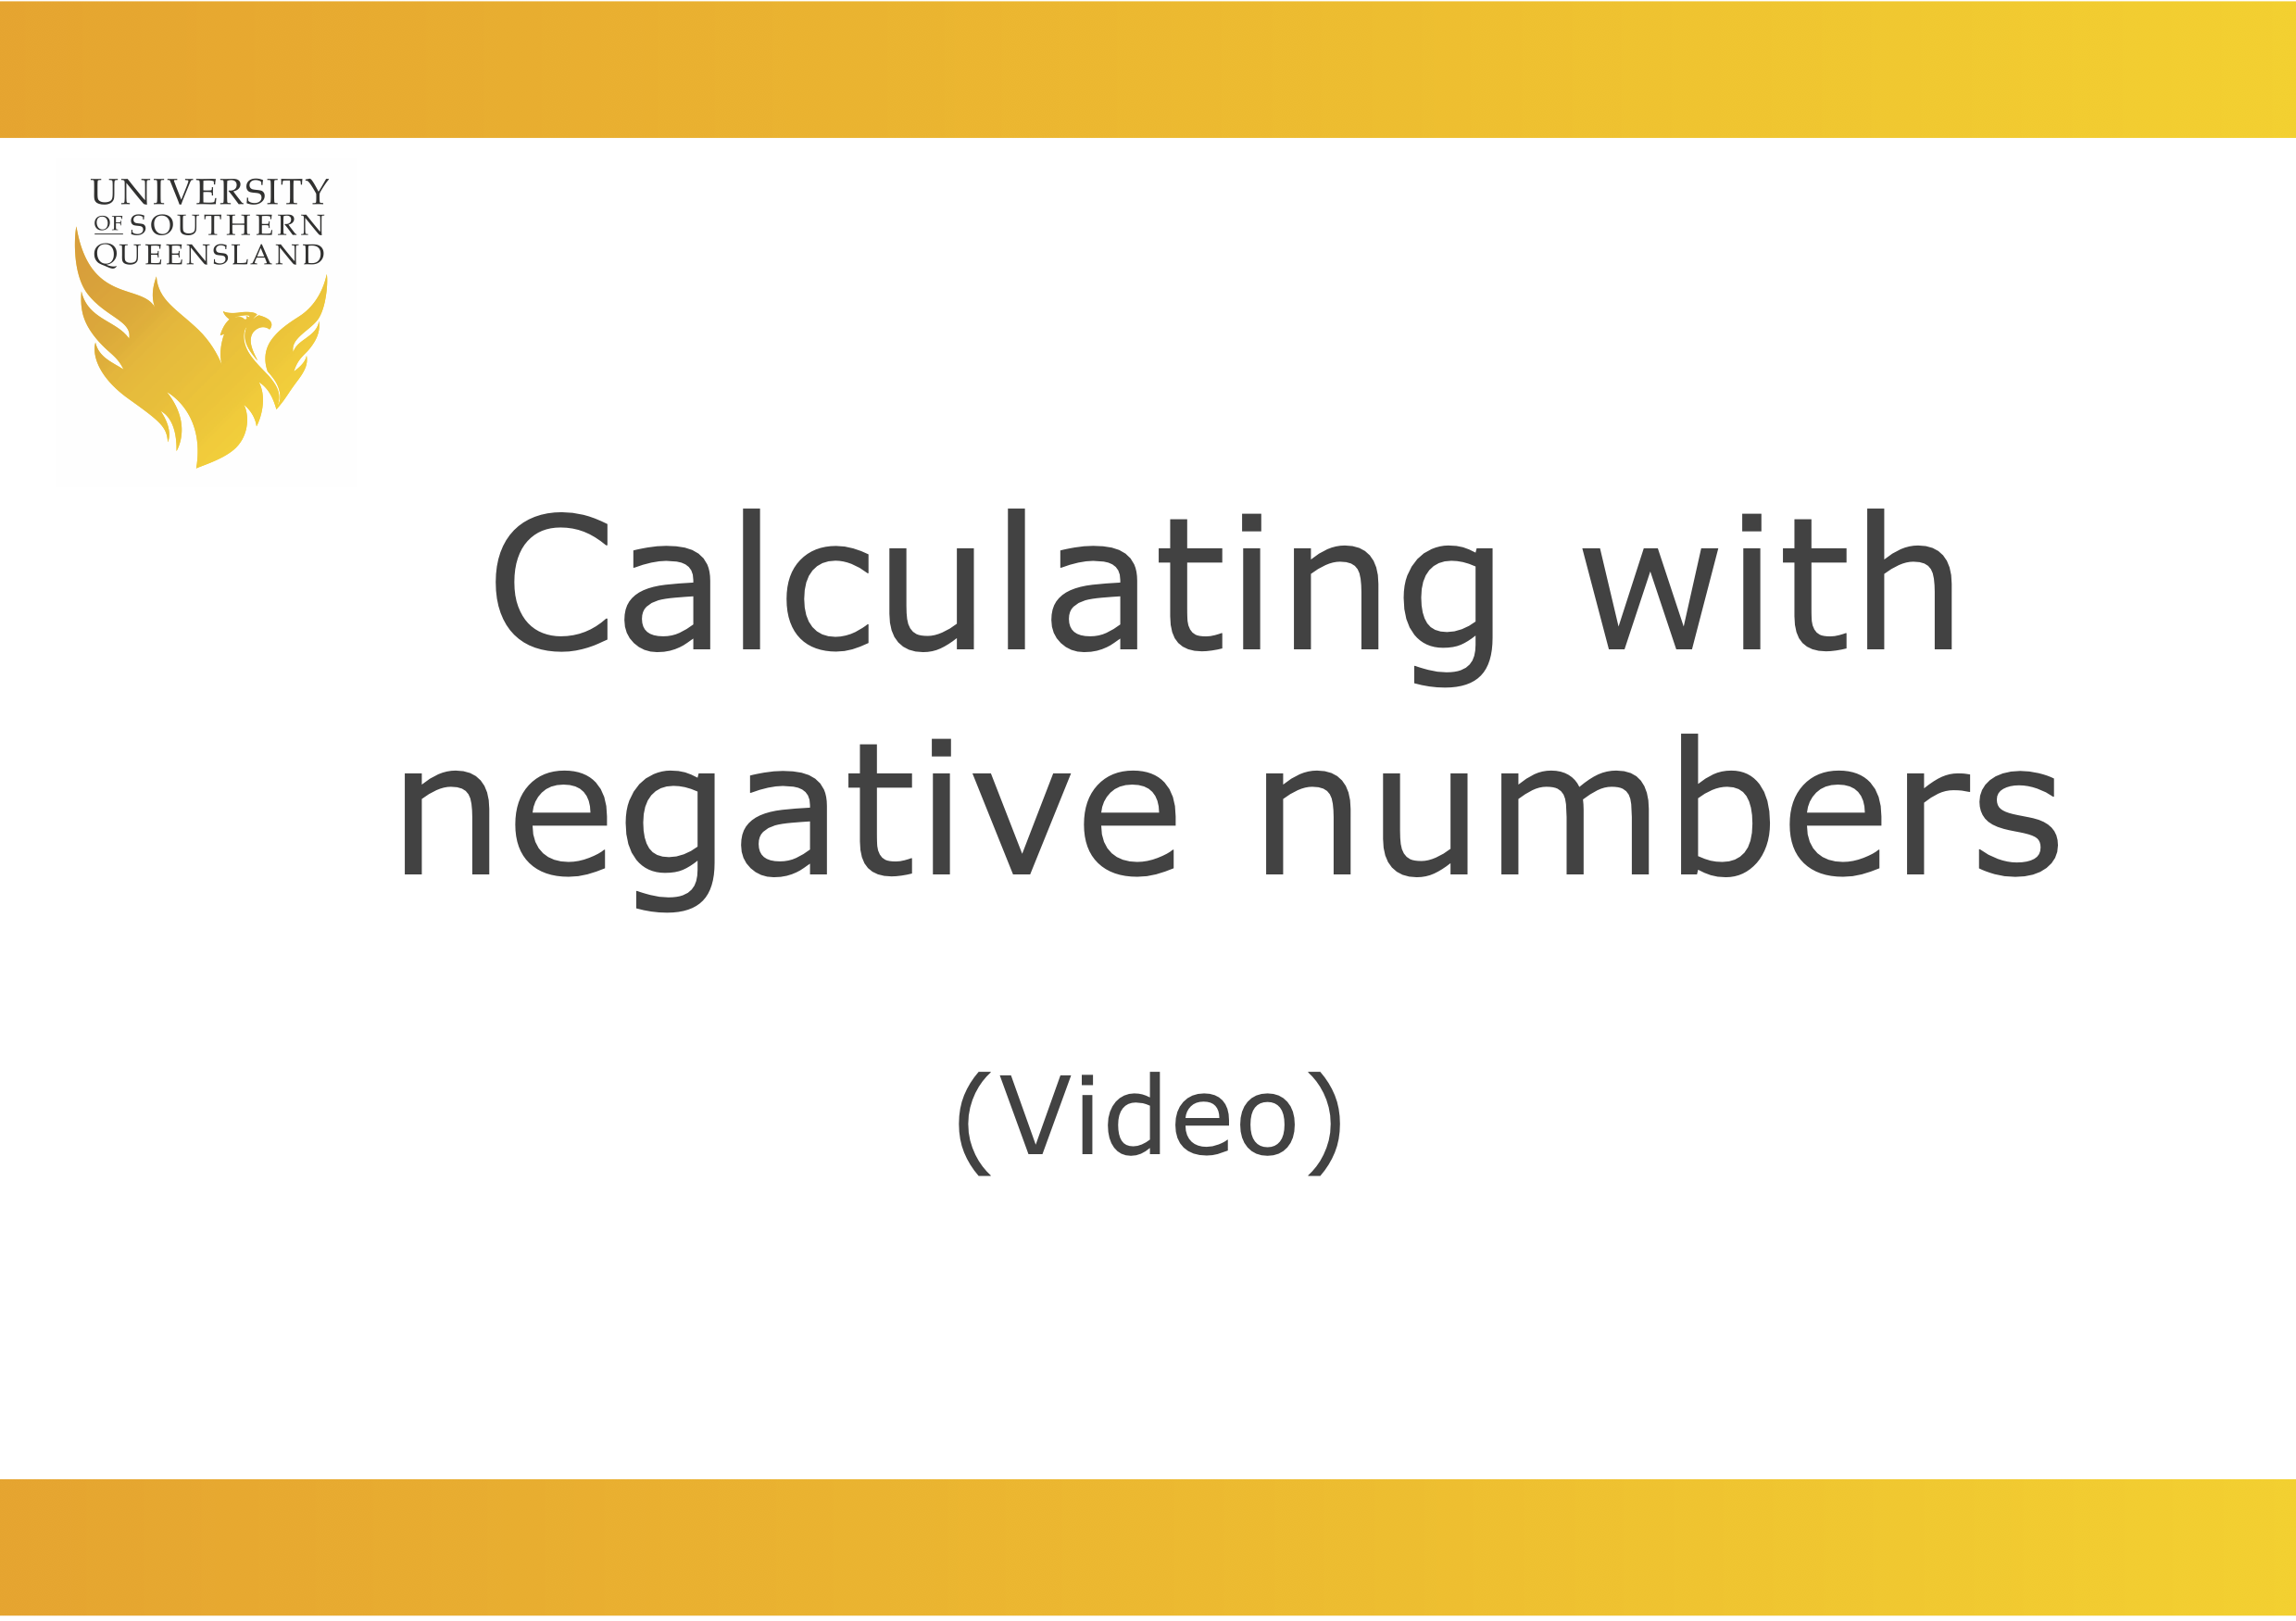 Calculating with negative numbers video